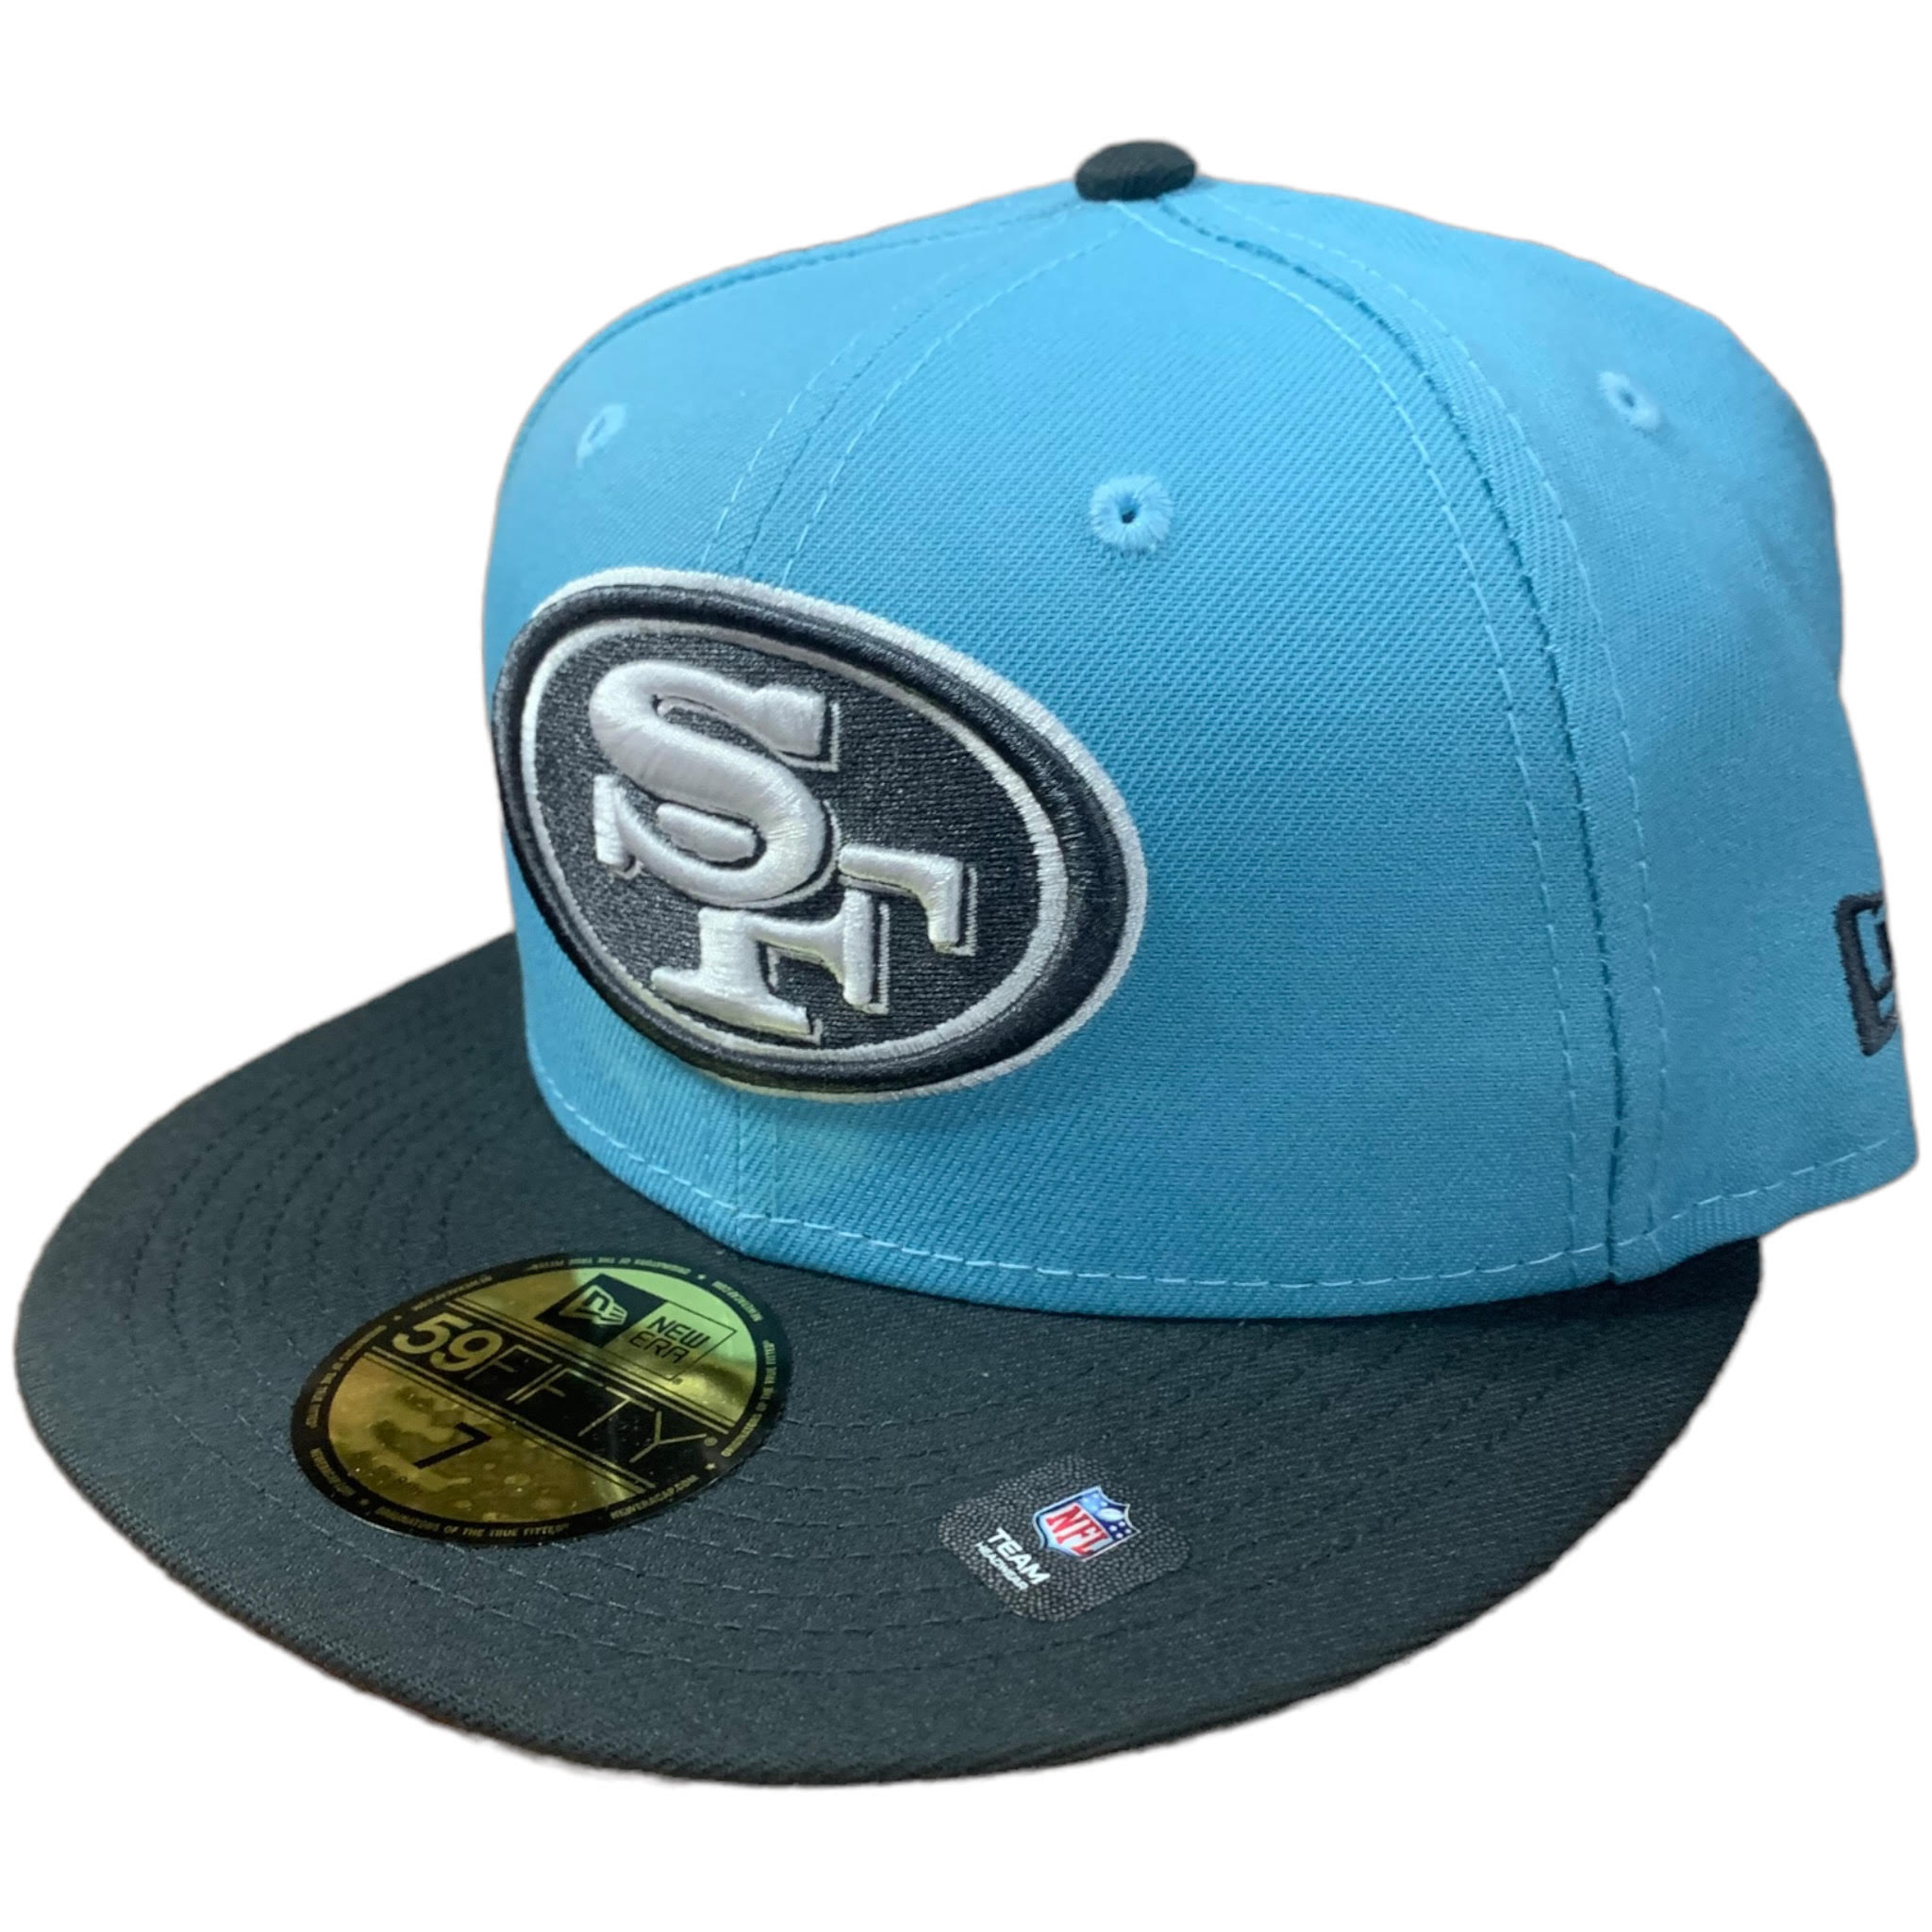 San Francisco 49ers 2-Tone Color Pack 59FIFTY Fitted Hat - Light Blue/ Charcoal BLFSTC / 7 7/8